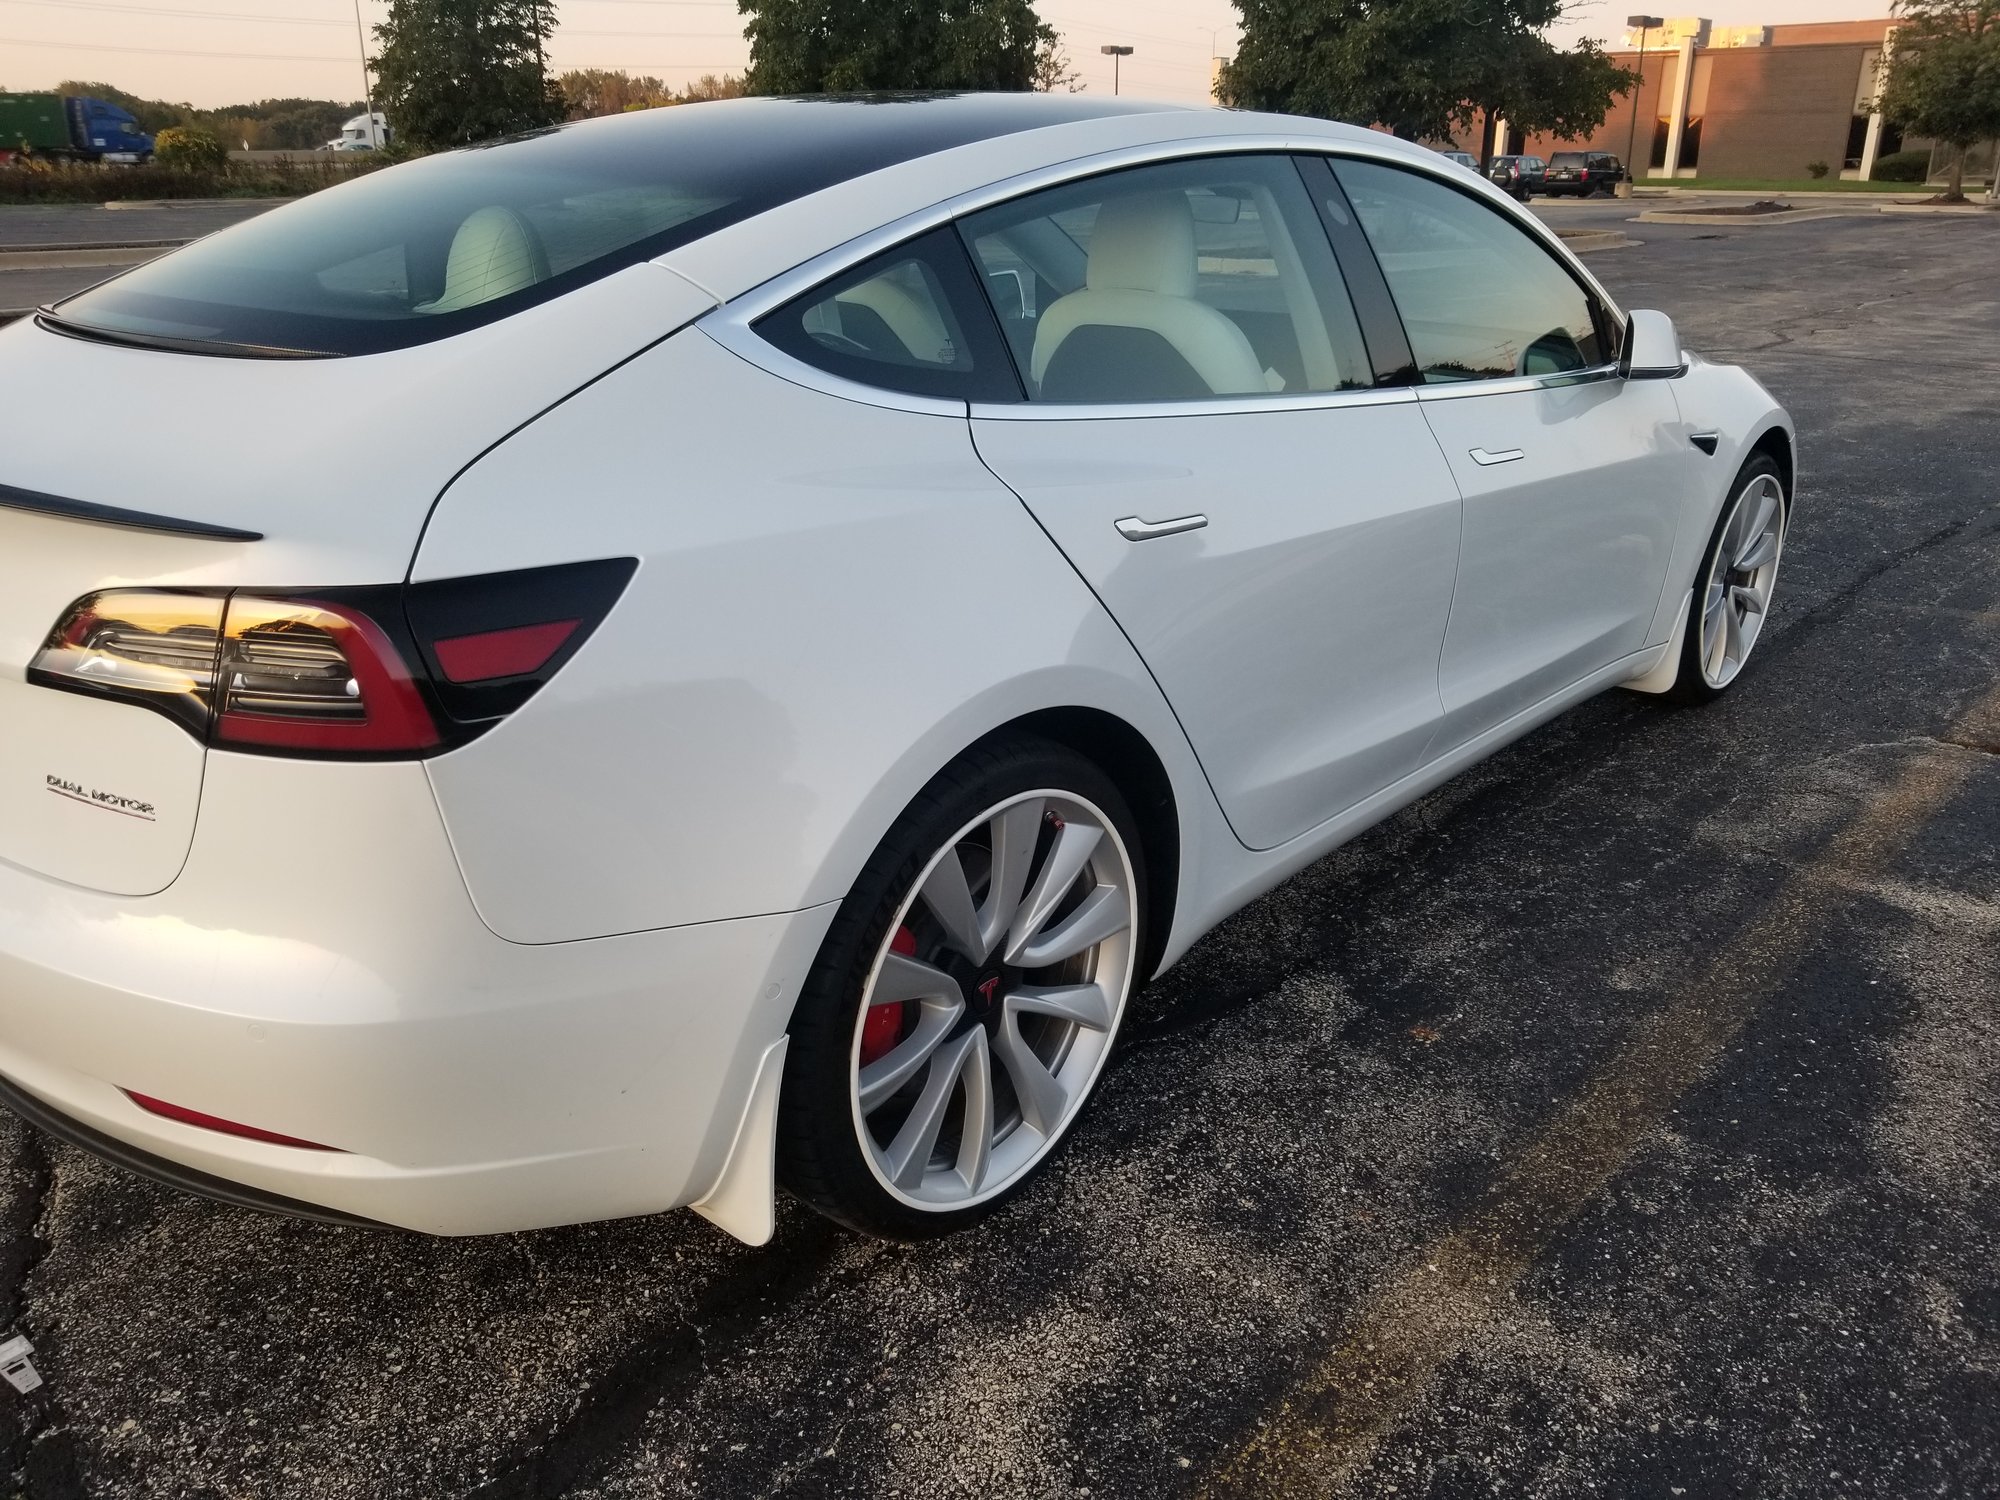 Model 3 mud guards, Page 6